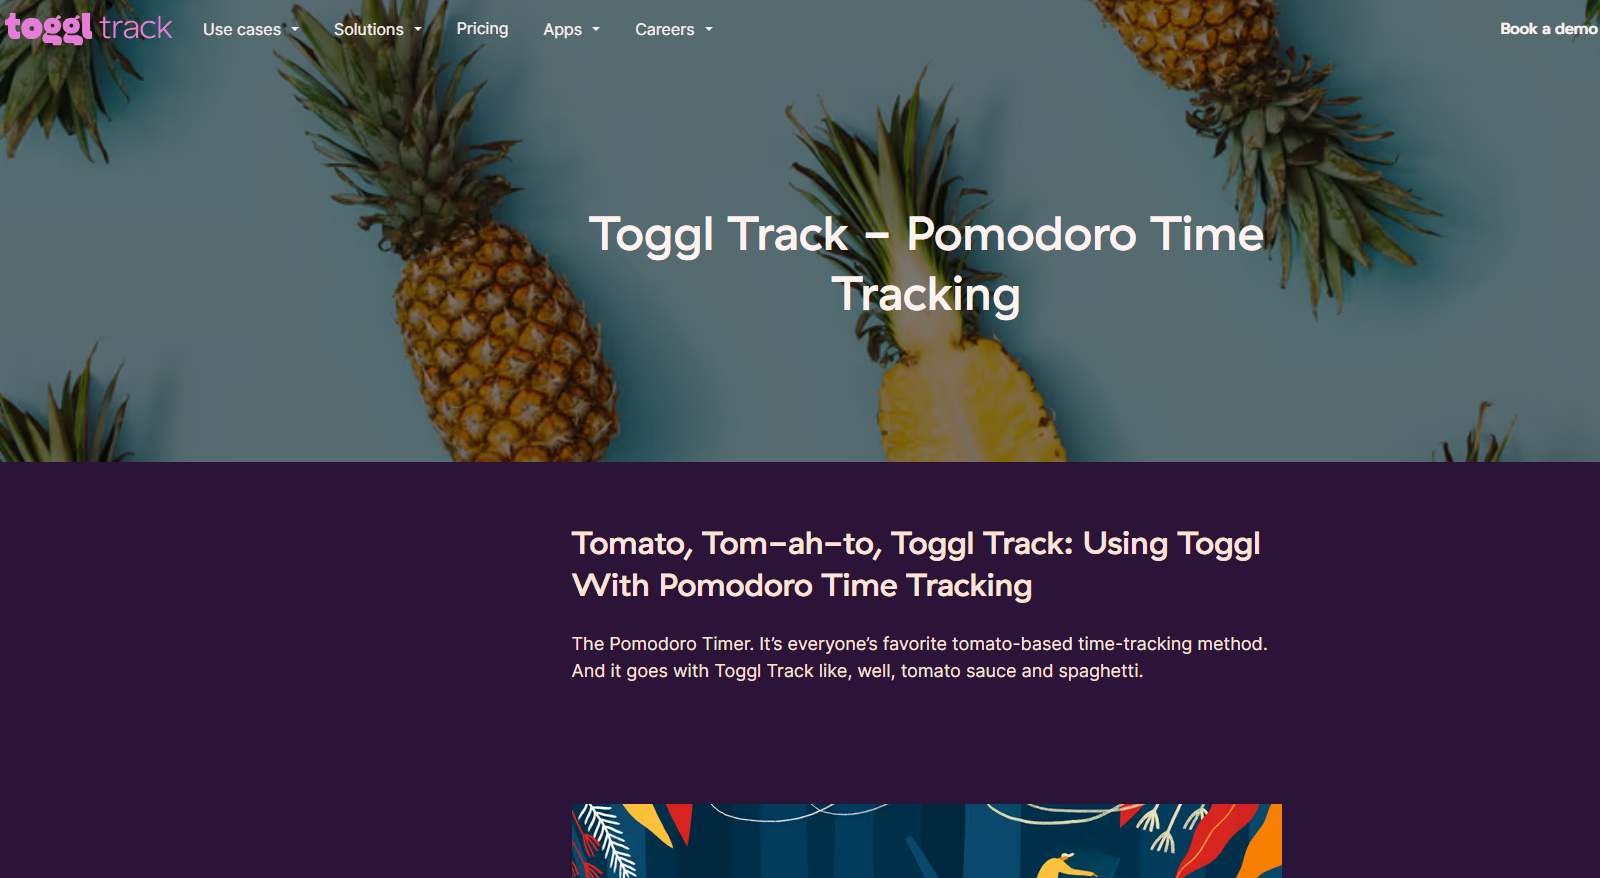 toggl track homepage showing pomodoro time tracking